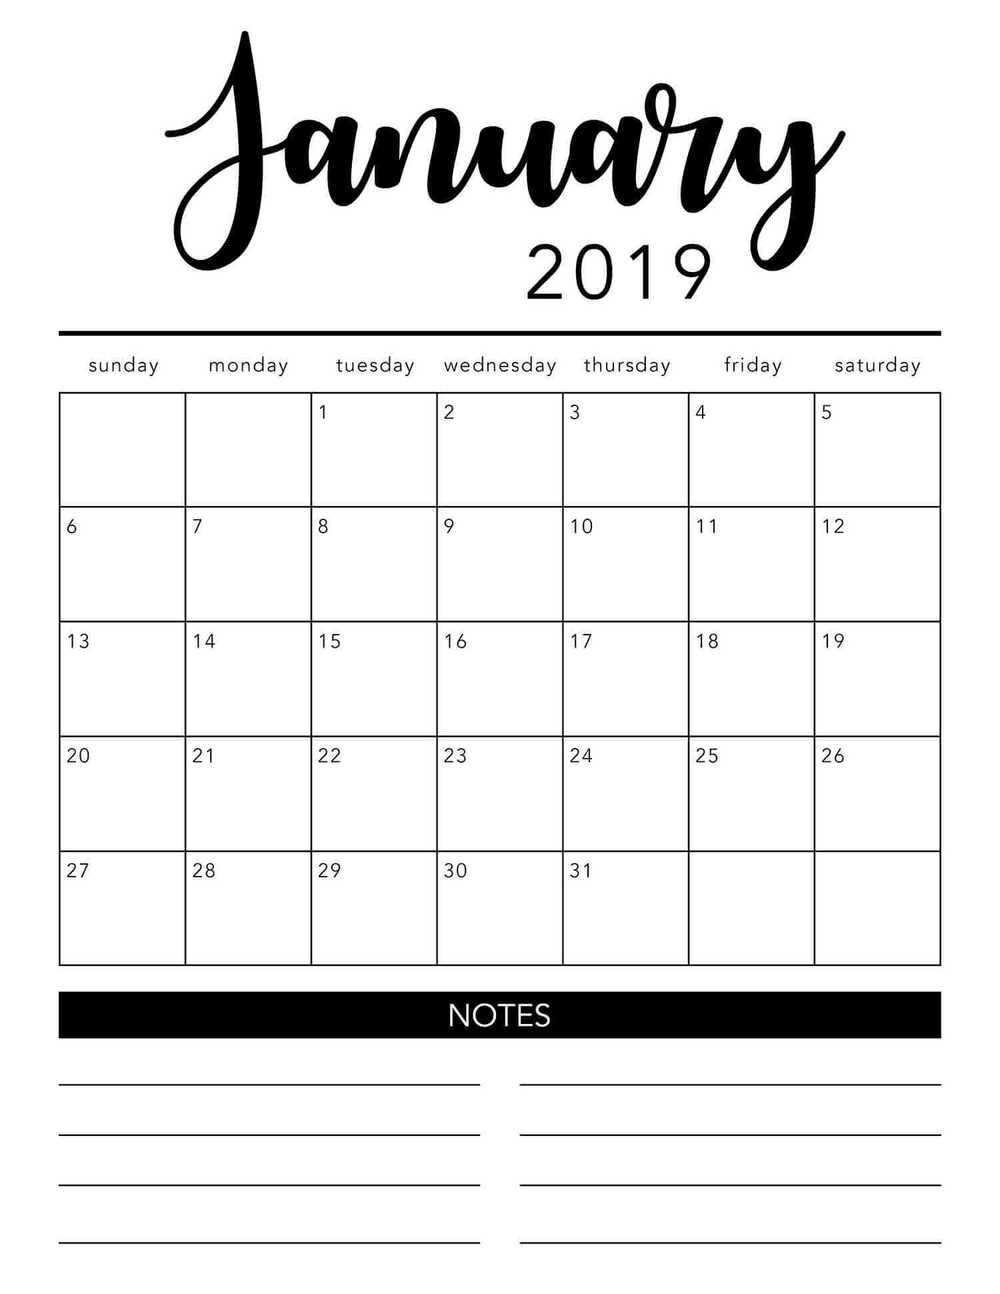 Free 2019 Printable Calendar Template (2 Colors!) - I Heart Naptime throughout Monthly Calendars To Print Colorful